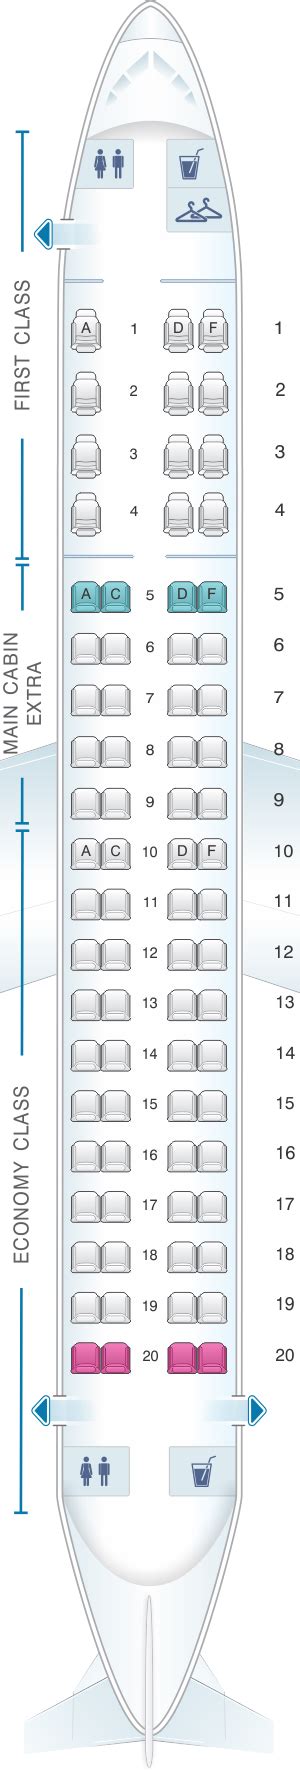 Embraer 175 american seat map. Yes. Detailed seat map United Airlines Embraer EMB 175 version 1. Find the best airplanes seats, information on legroom, recline and in-flight entertainment using our detailed online seating charts. 